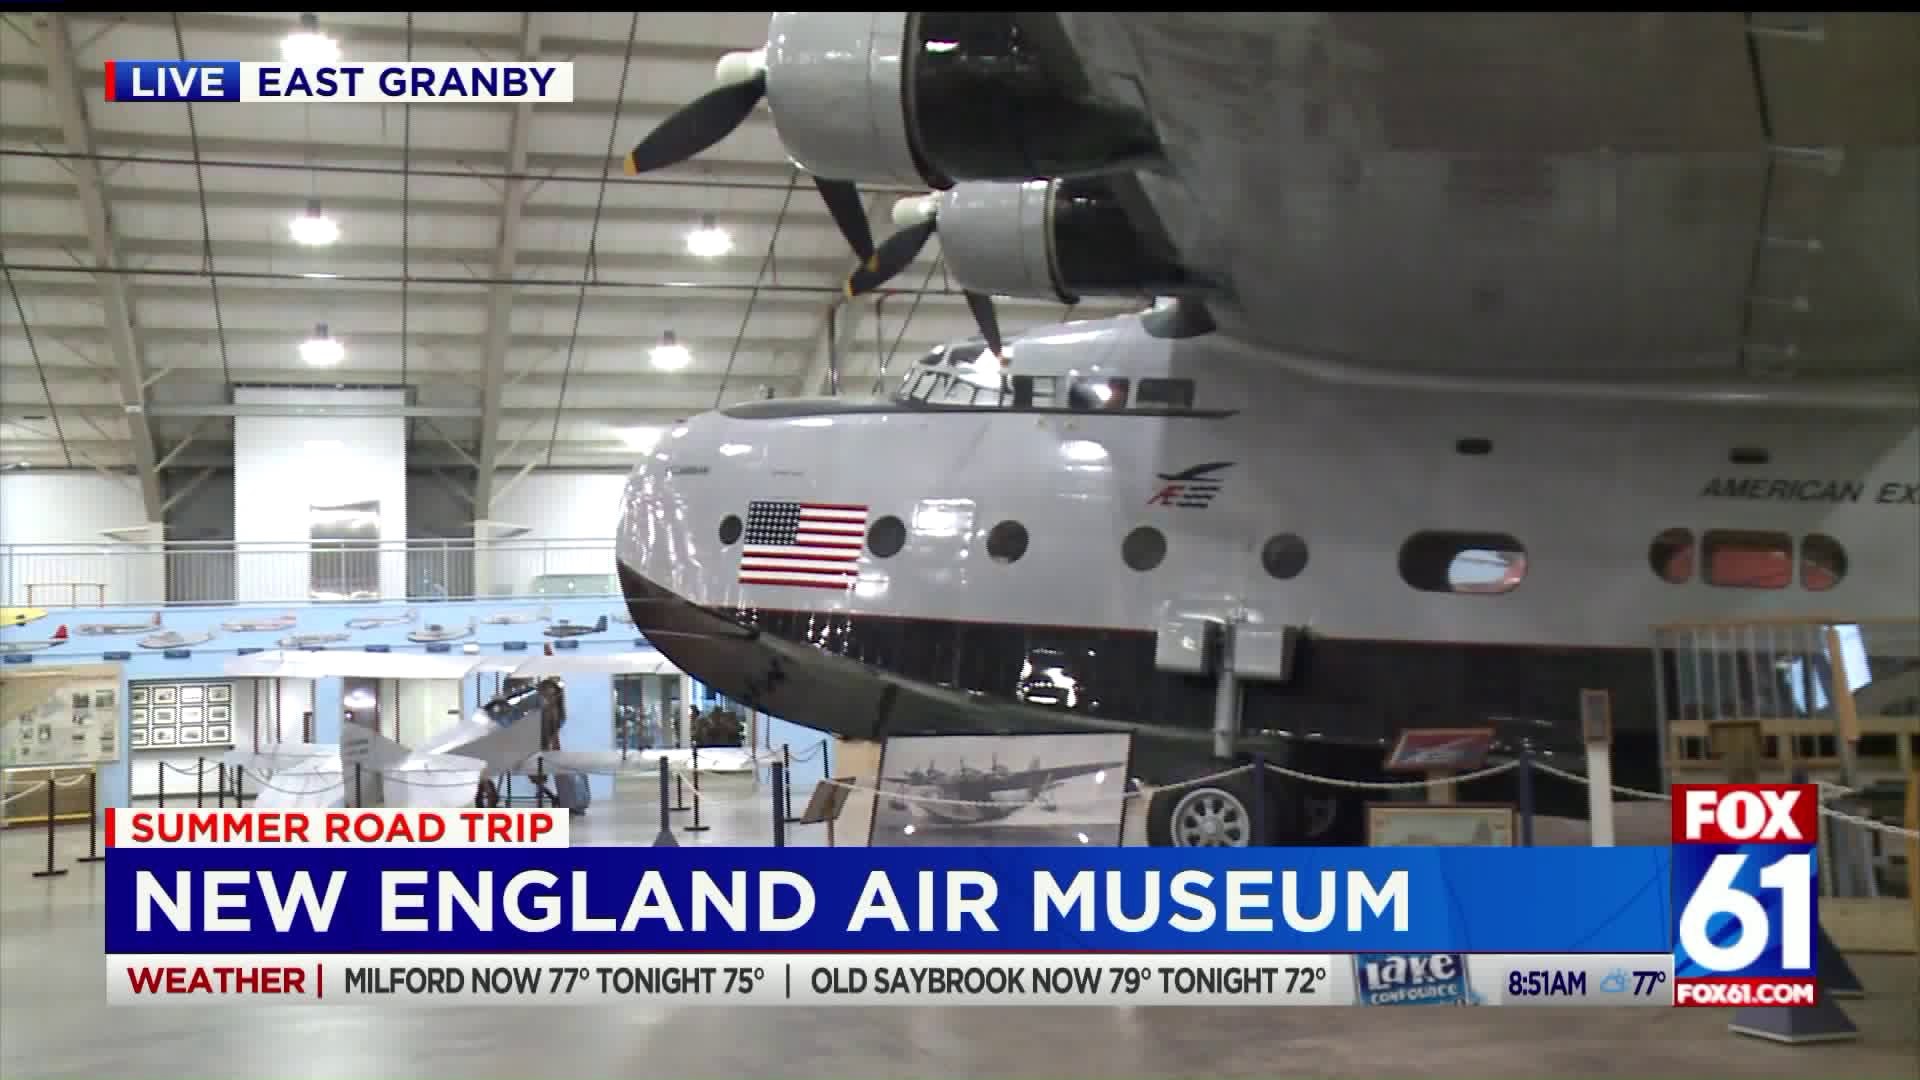 Taking flight at the New England Air Museum